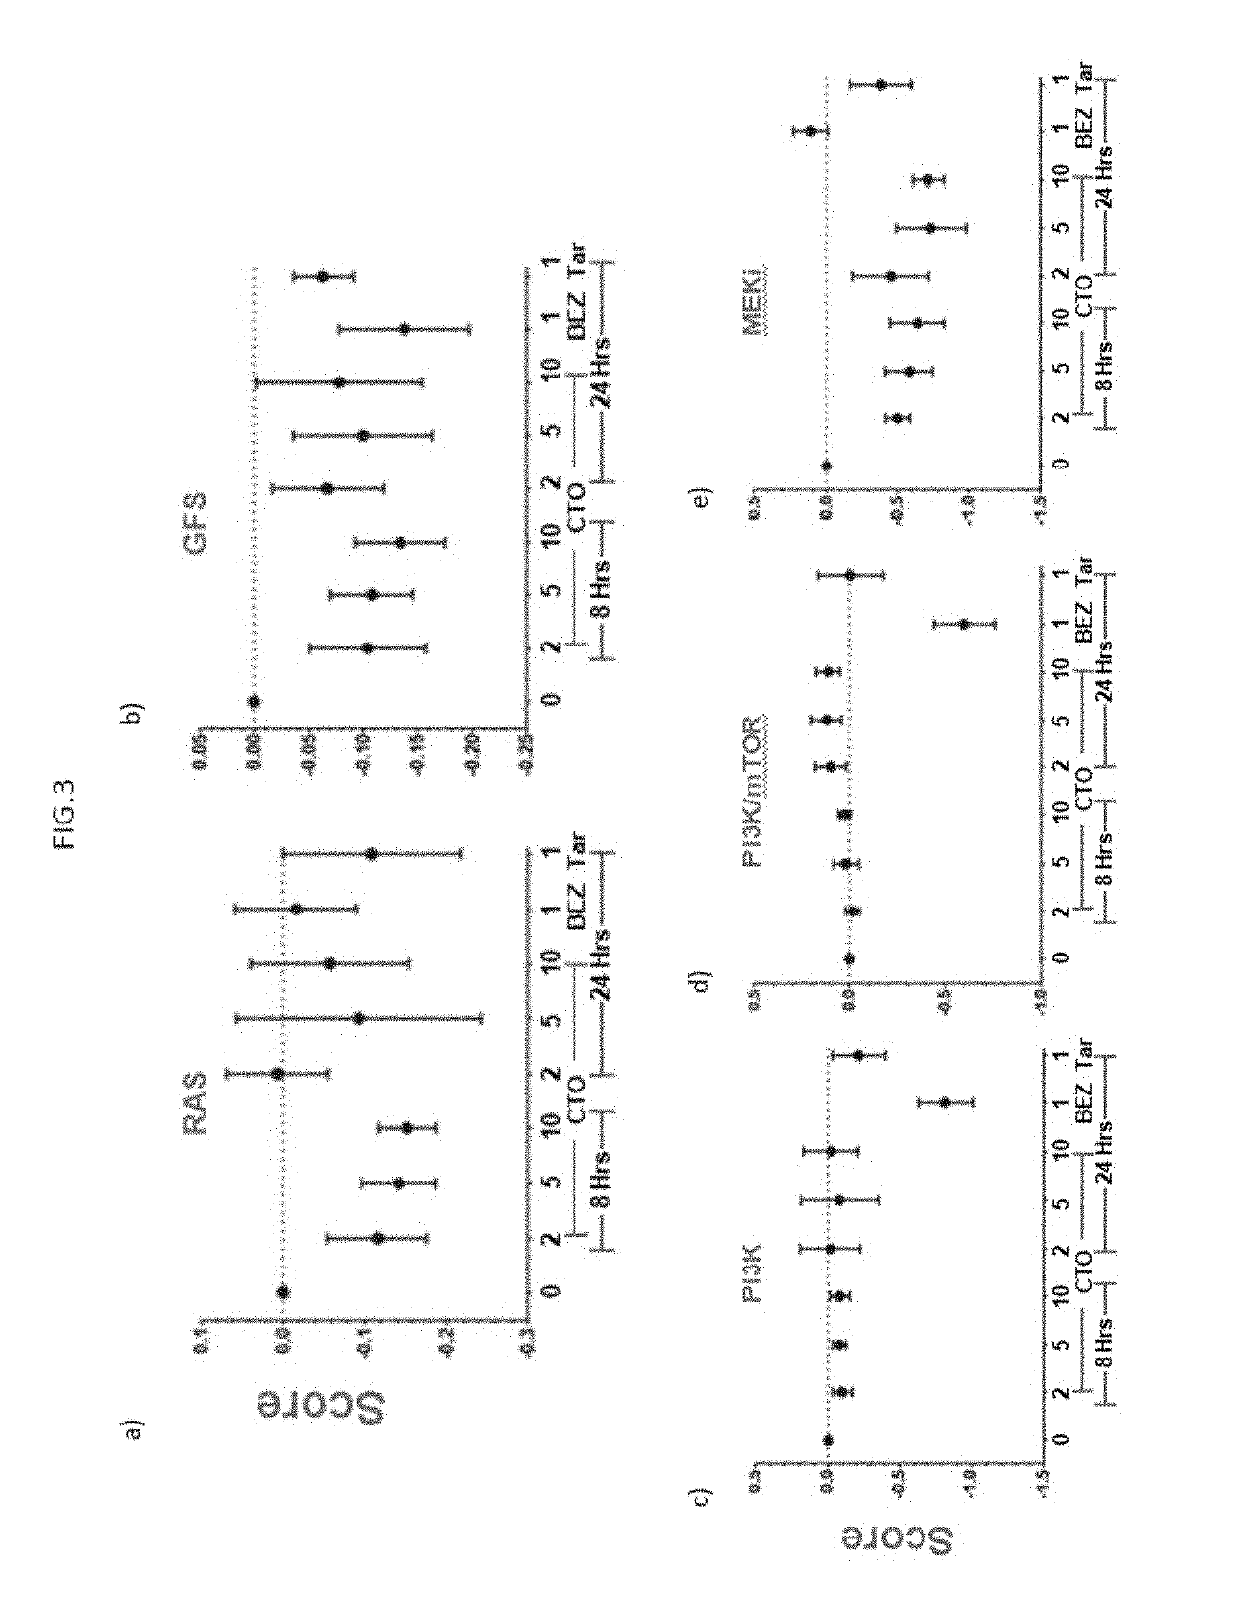 Methods and molecular pharmacodynamic biomarkers for multiple signaling pathways in response to carboxyamidotriazole orotate